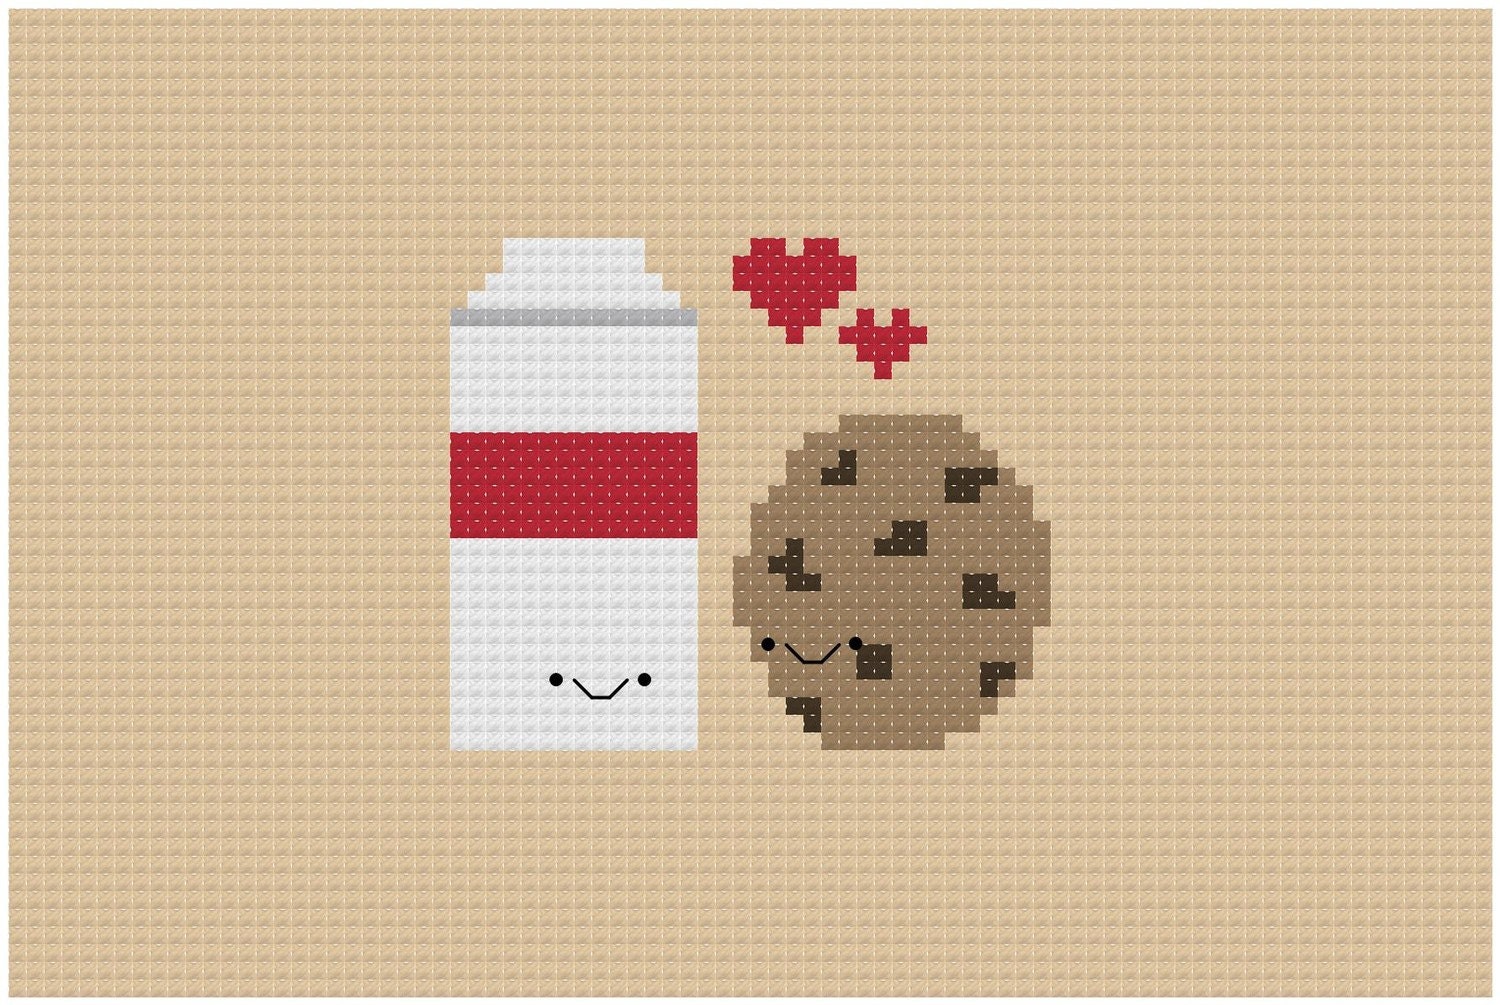 Perfect Pairings - Kawaii Milk and Cookie - PDF Cross-stitch Pattern - INSTANT DOWNLOAD